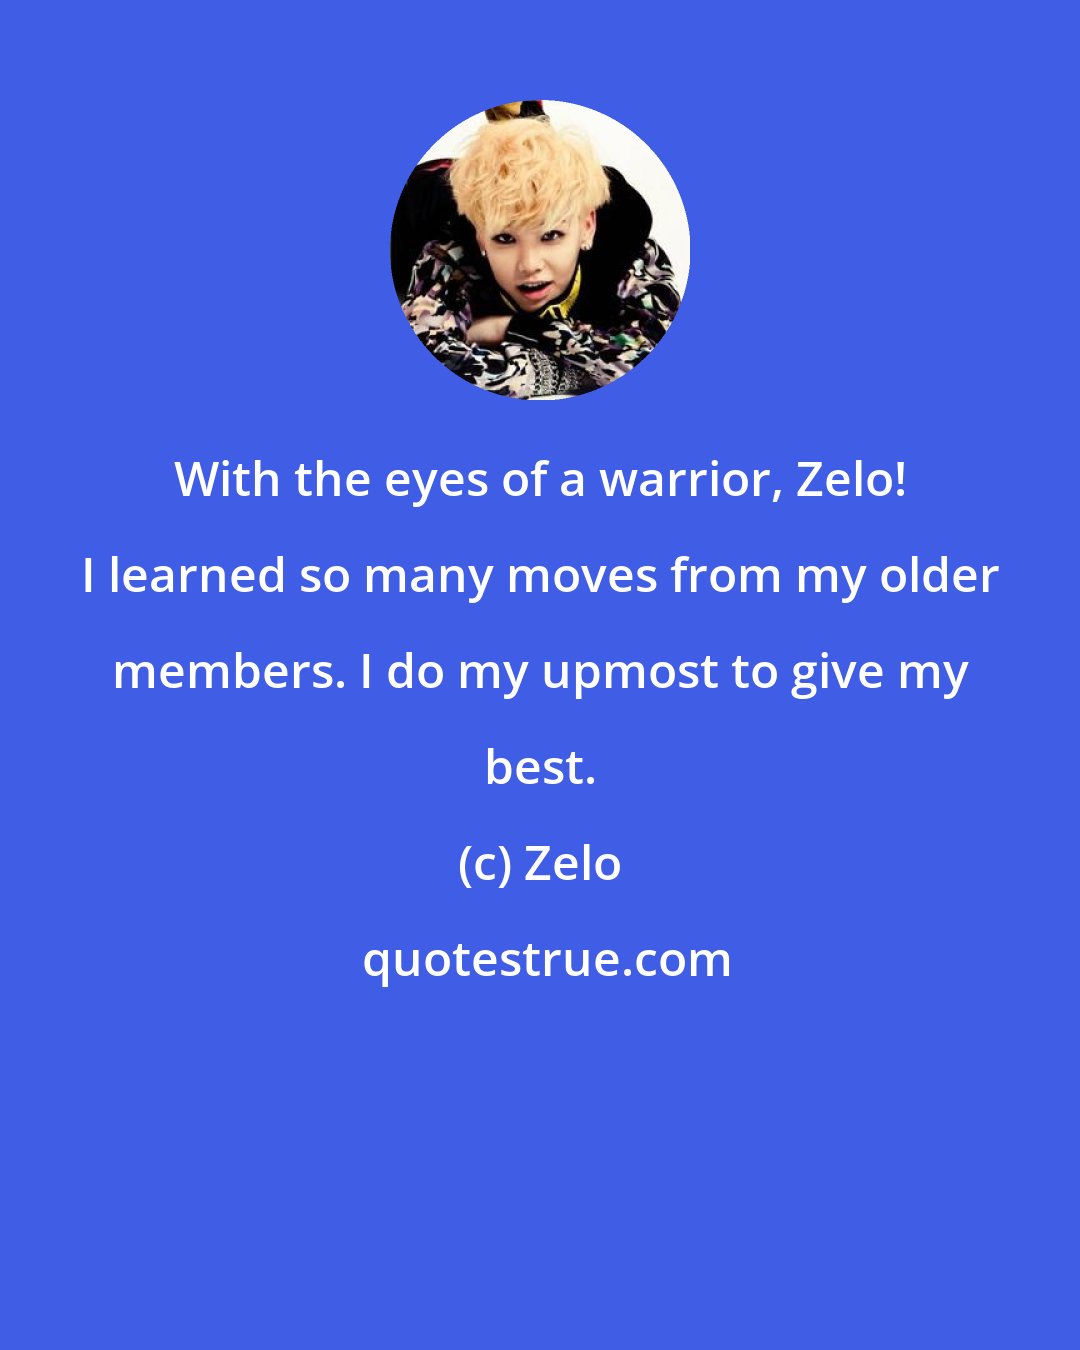 Zelo: With the eyes of a warrior, Zelo! I learned so many moves from my older members. I do my upmost to give my best.